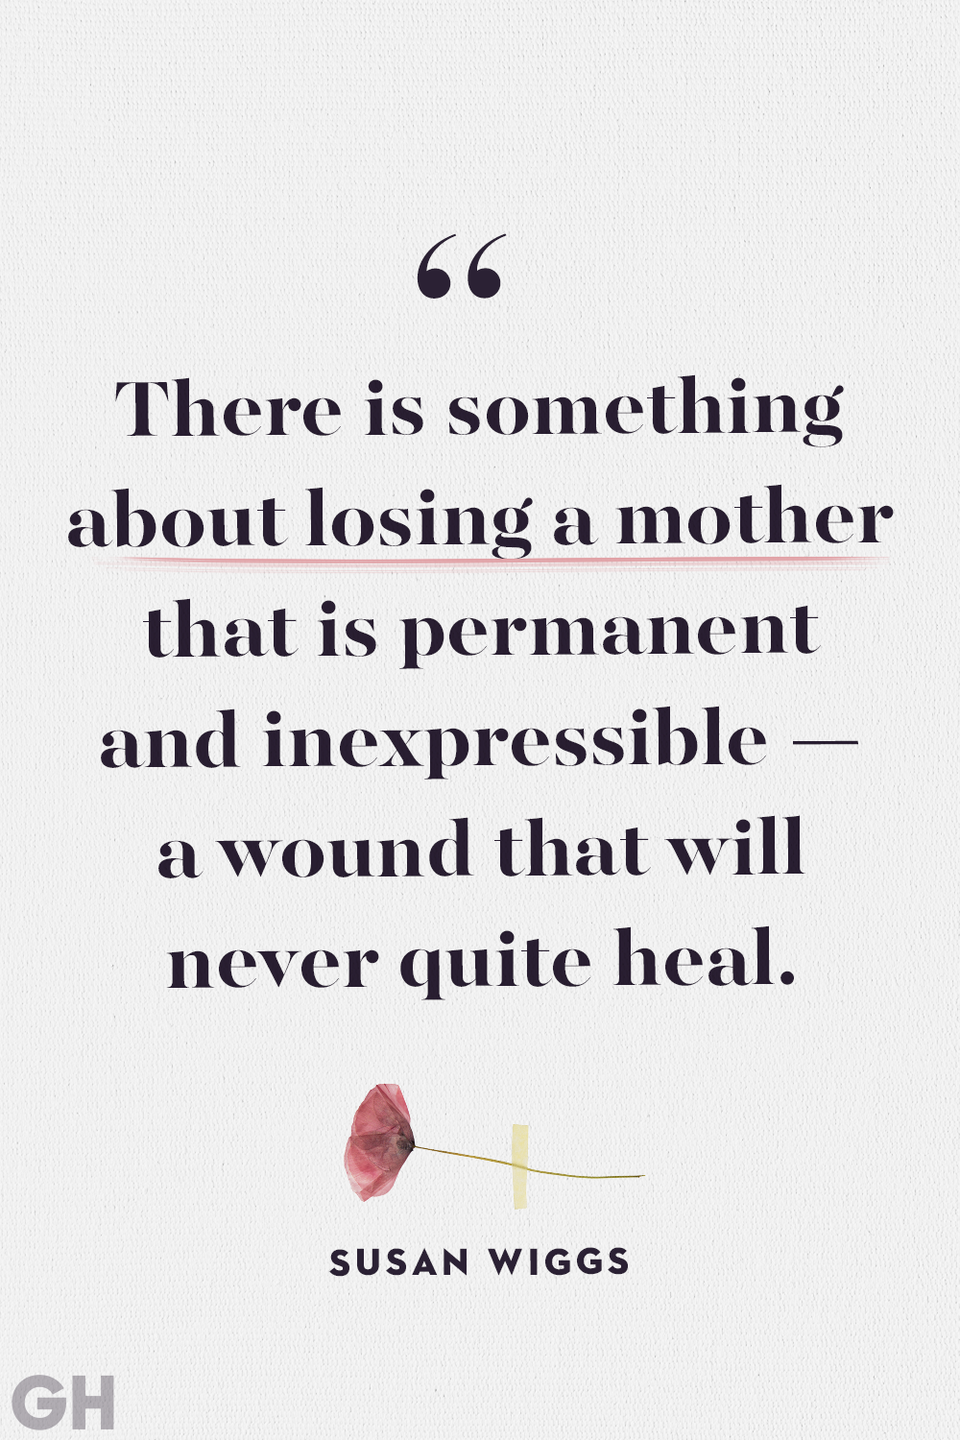 <p>There is something about losing a mother that is permanent and inexpressible- a wound that will never quite heal.</p>